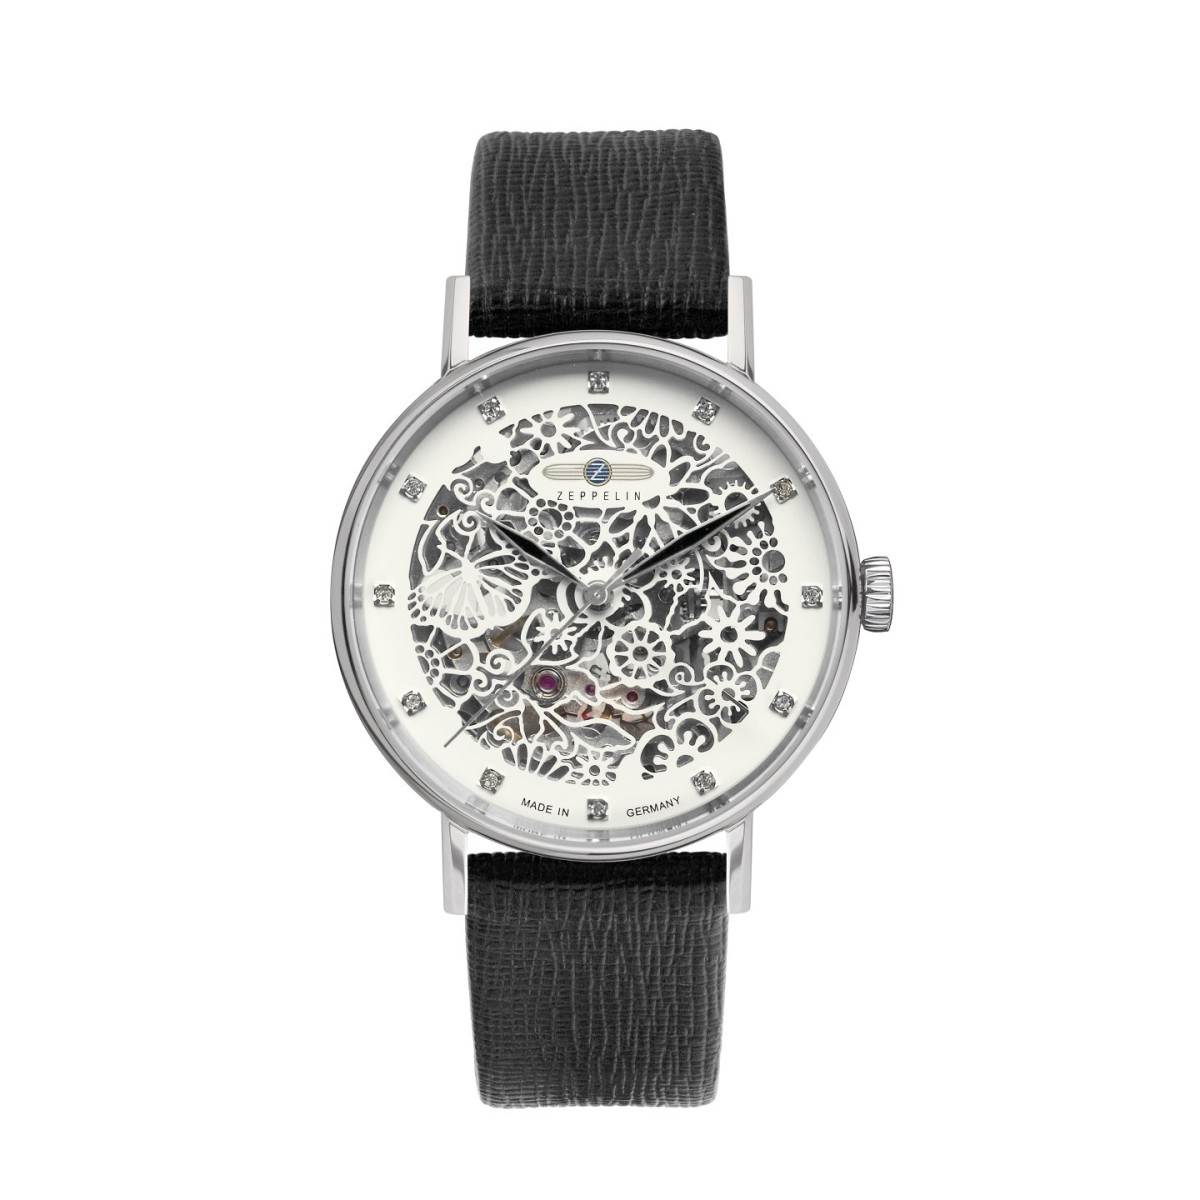 Zeppelin Princess of the Sky Automatic skeleton watch with leather strap